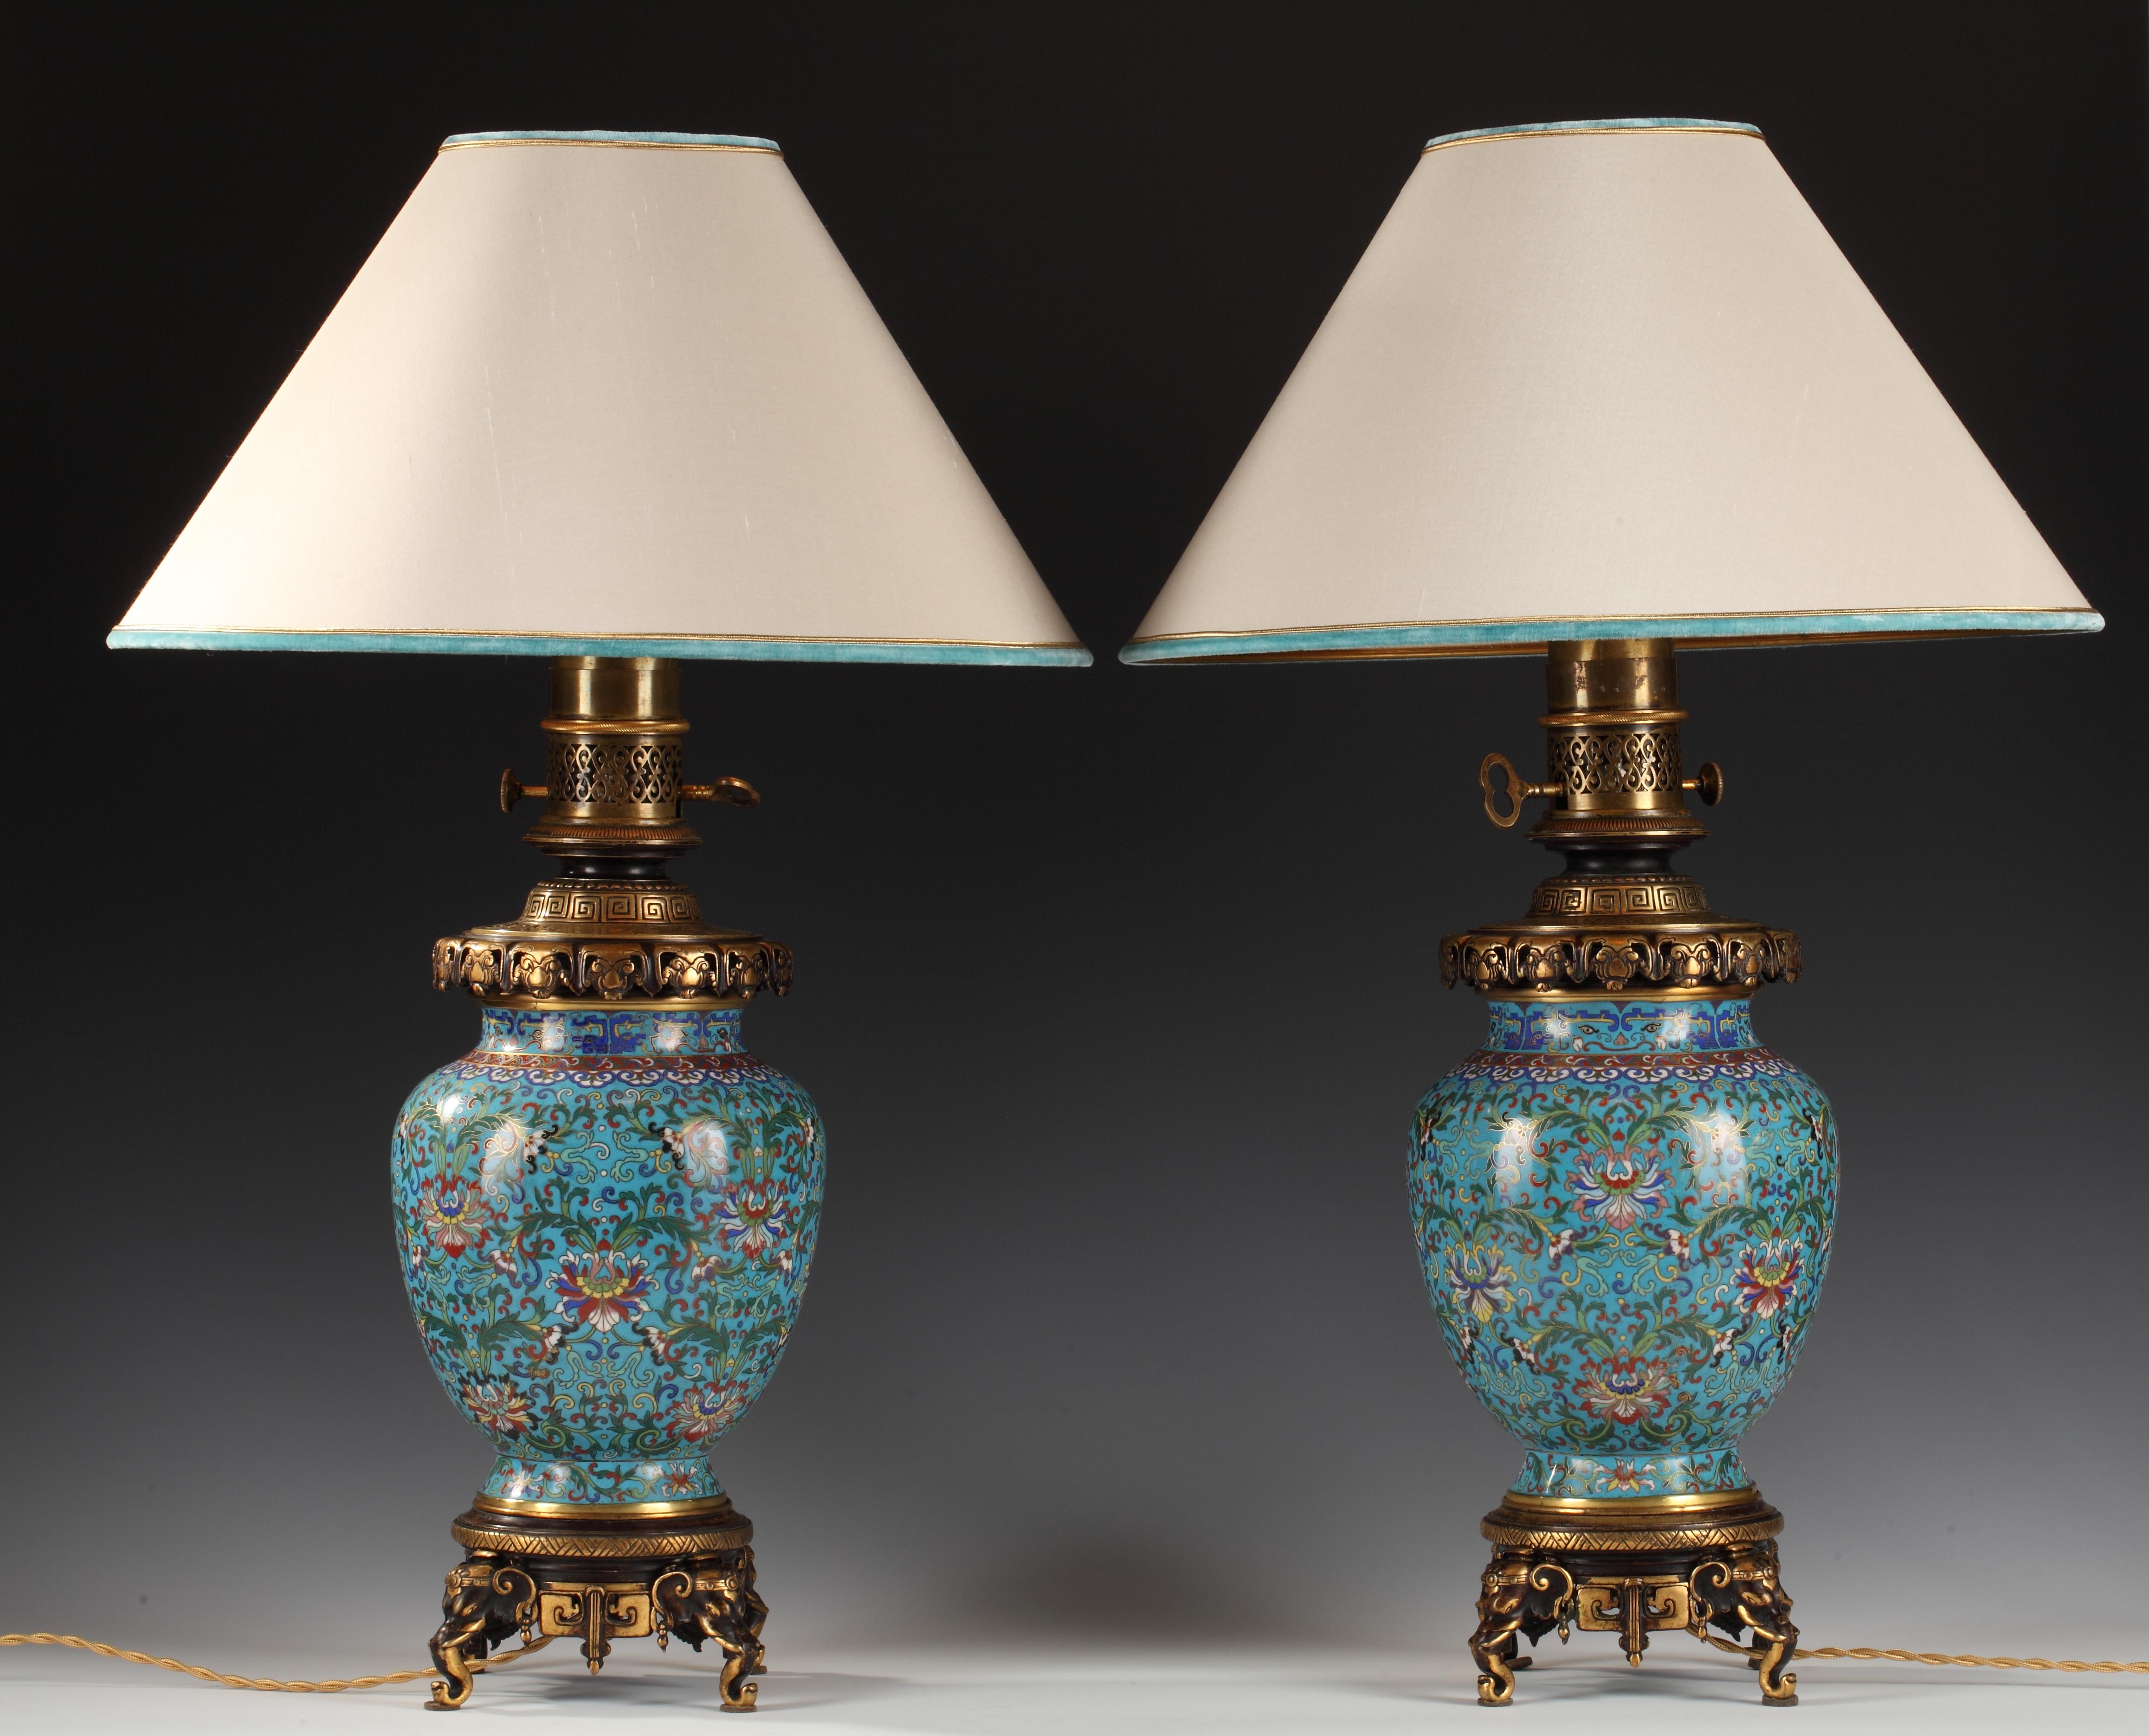 Signed twice Gagneau on the bronze light fittings. 

Pair of Chinese cloisonné enamel lamps with polychrome foliate patterns, mounted in gilded and patinated bronze mounts. The neck is enriched with openwork mounts, and Greek frieze, and Chinese